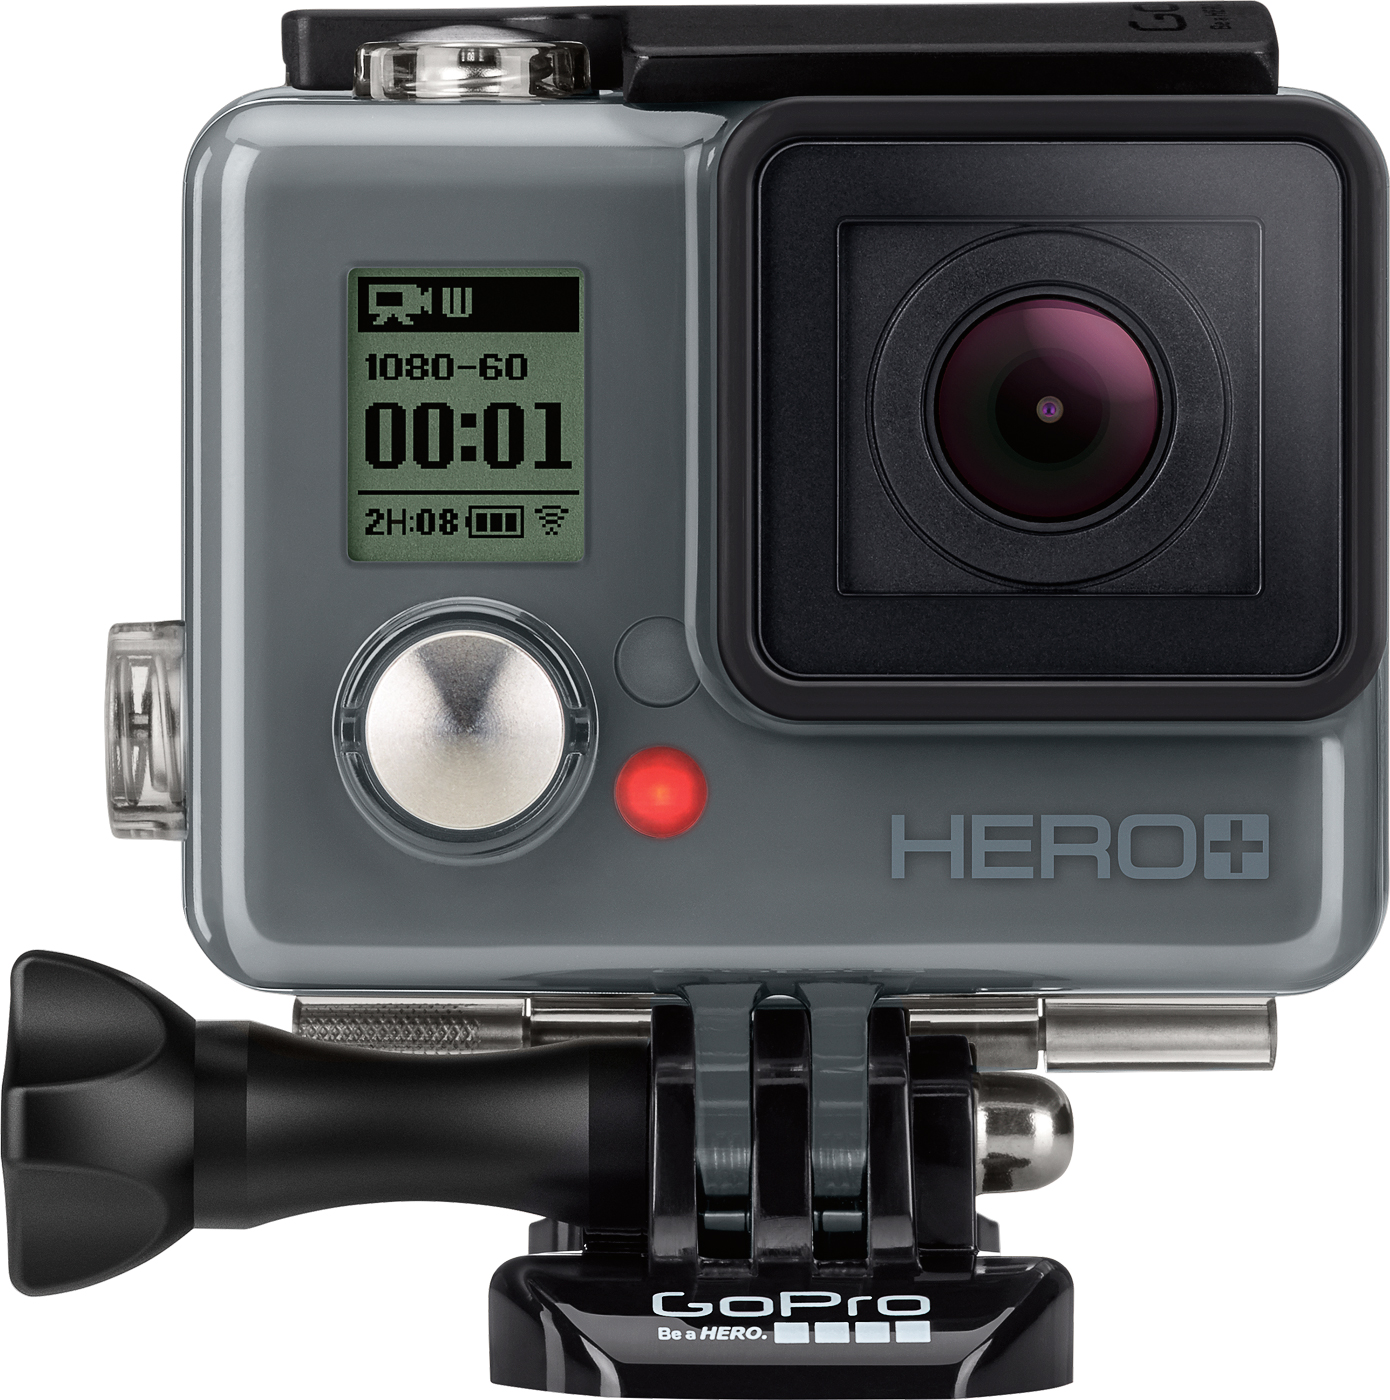 Capture Every Sweet Summer Moment with GoPro Hero+LCD!